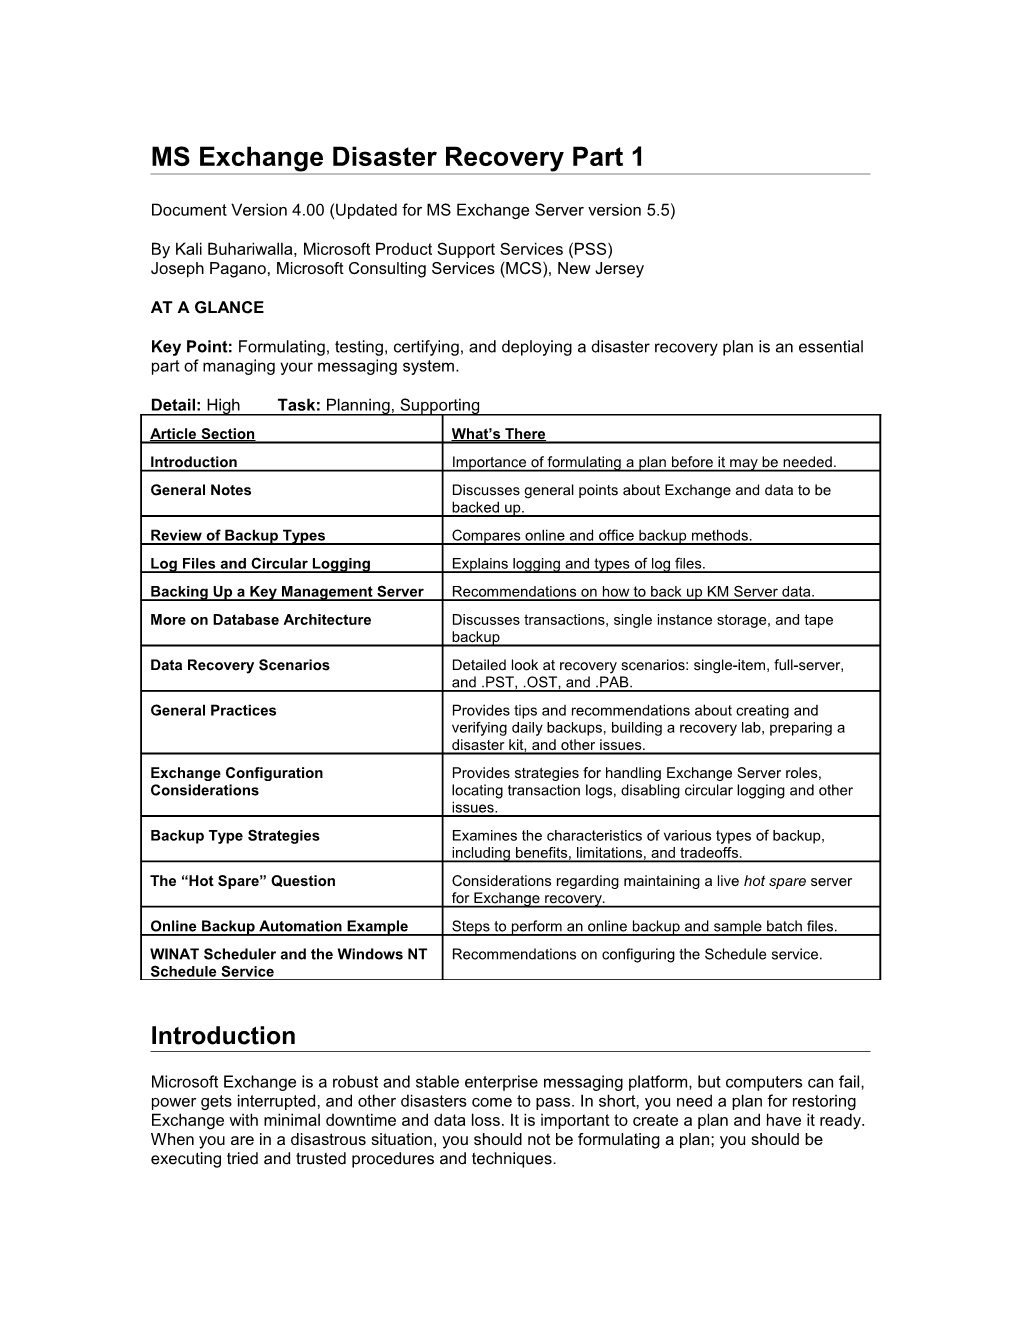 Chapter 9: Disaster Recovery Concepts